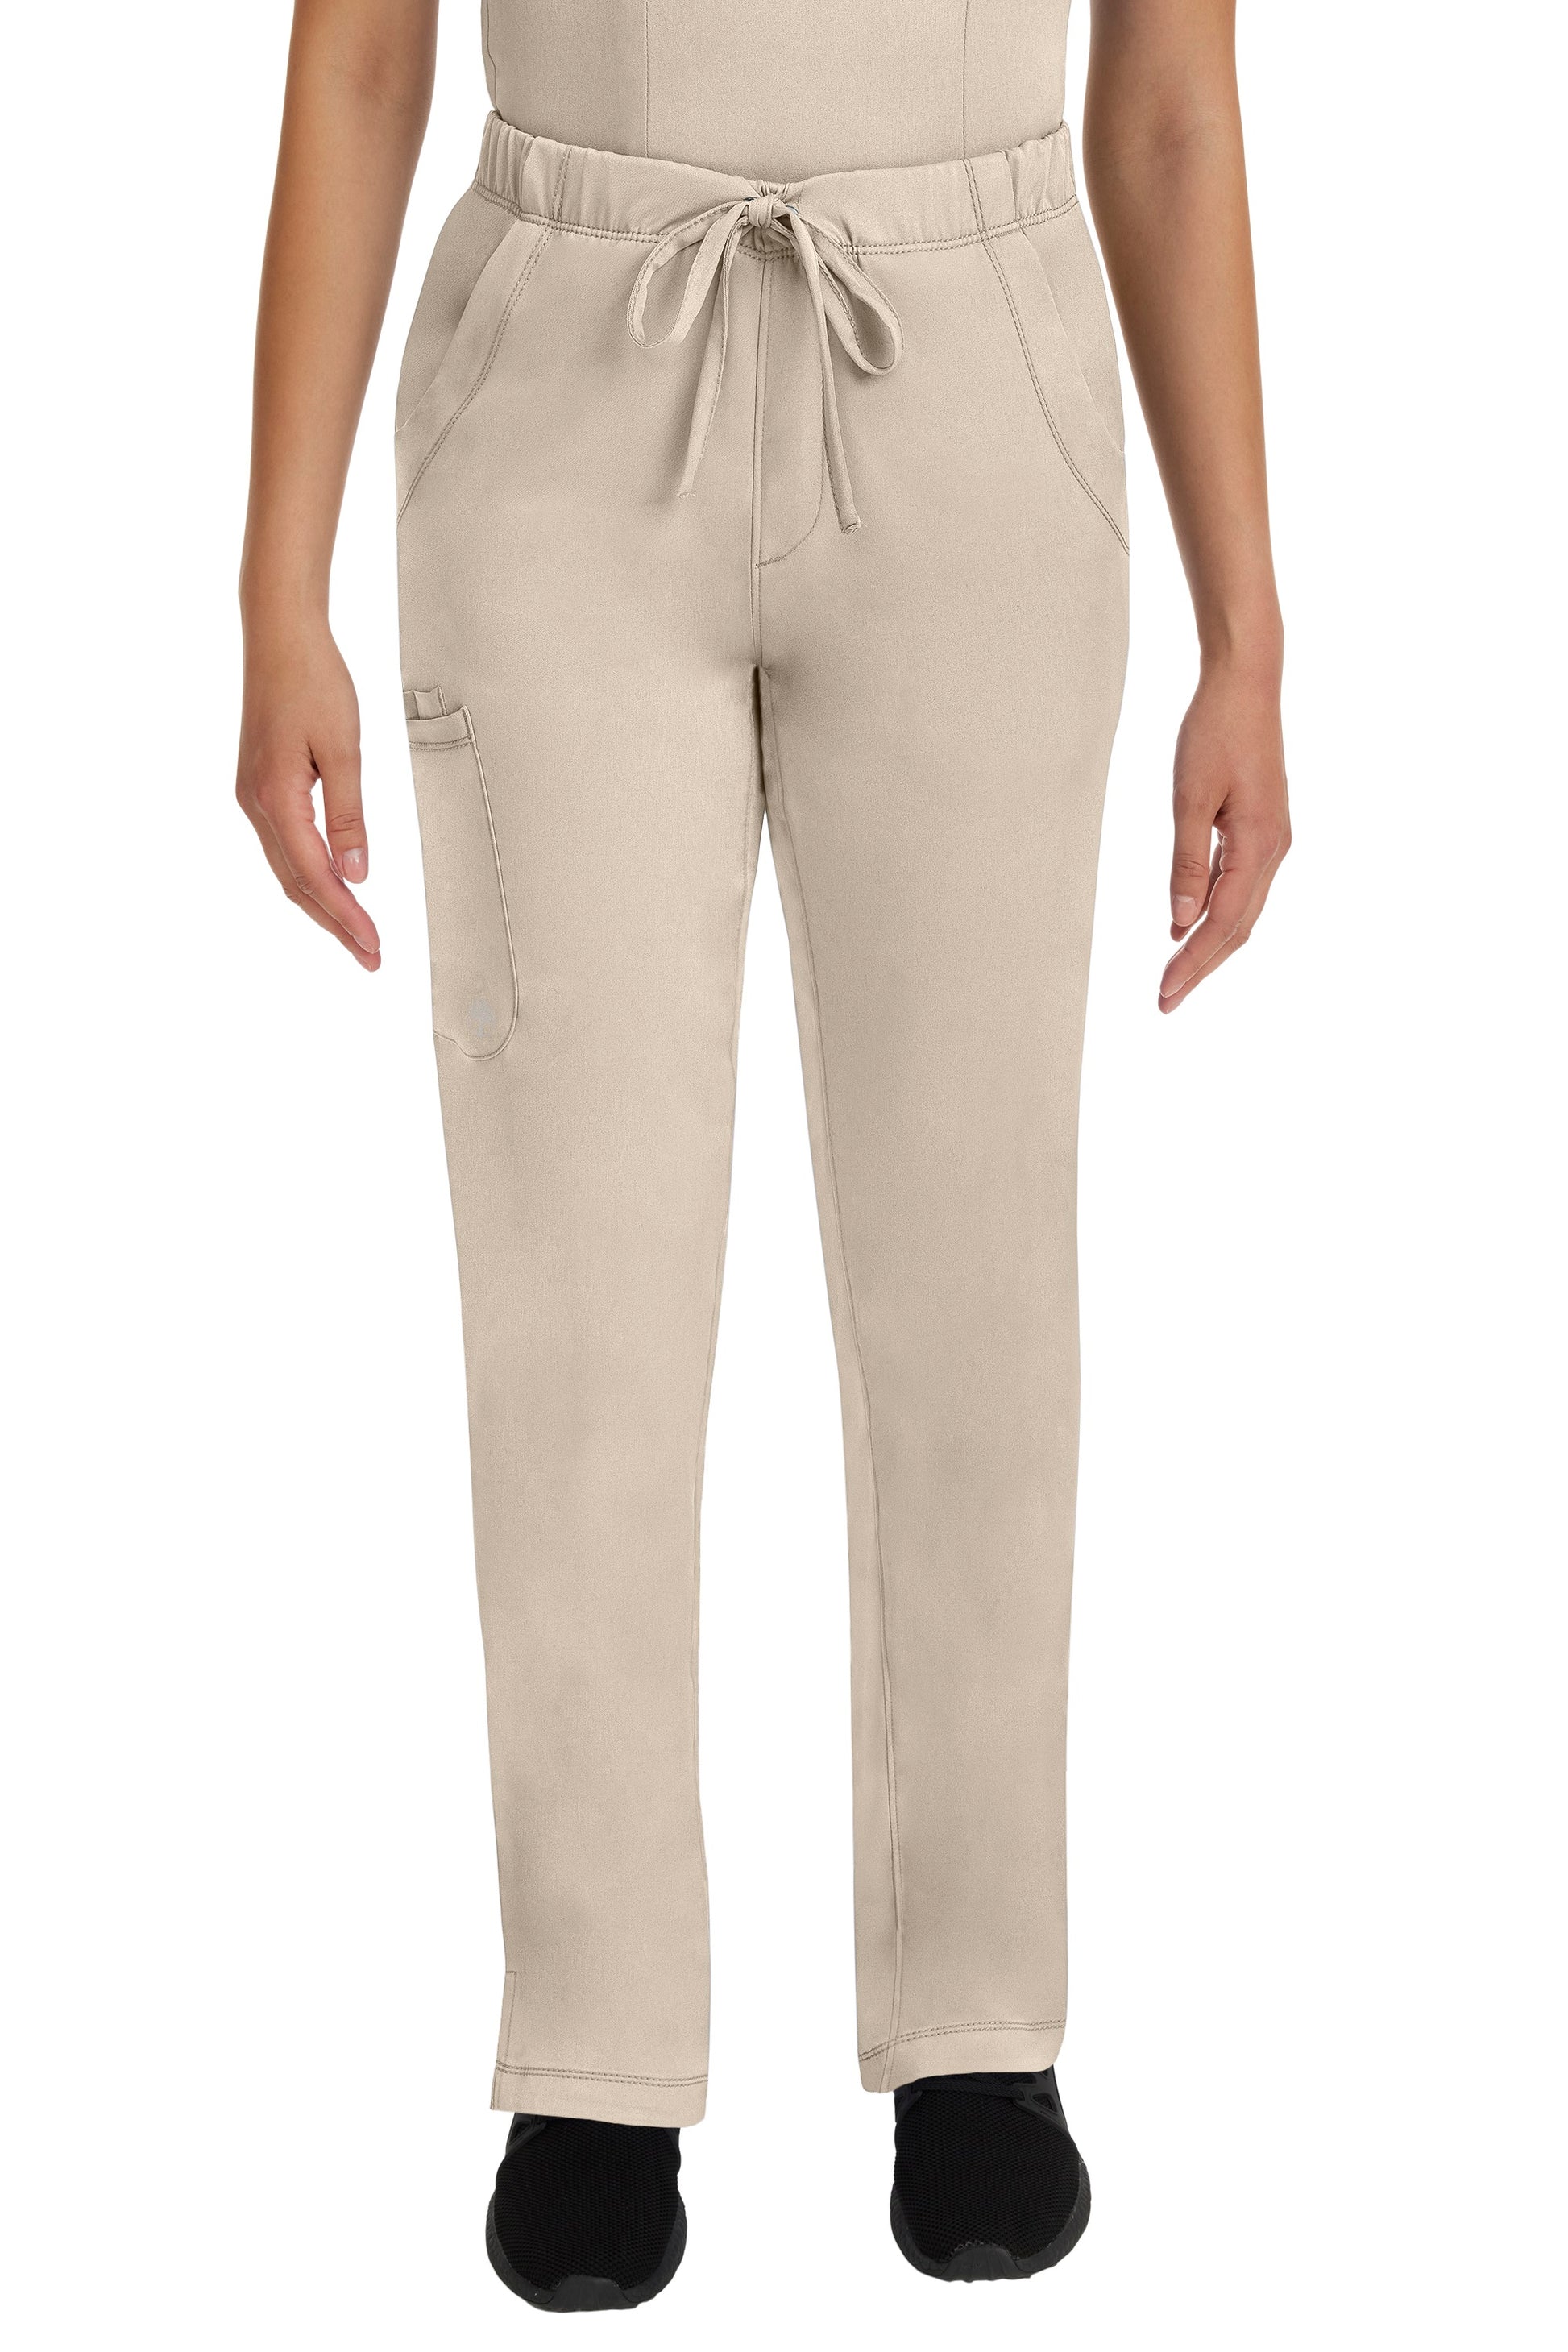 Healing Hands HH Works Rebecca Tall Scrub Pant in Khaki at Parker's Clothing and Shoes.